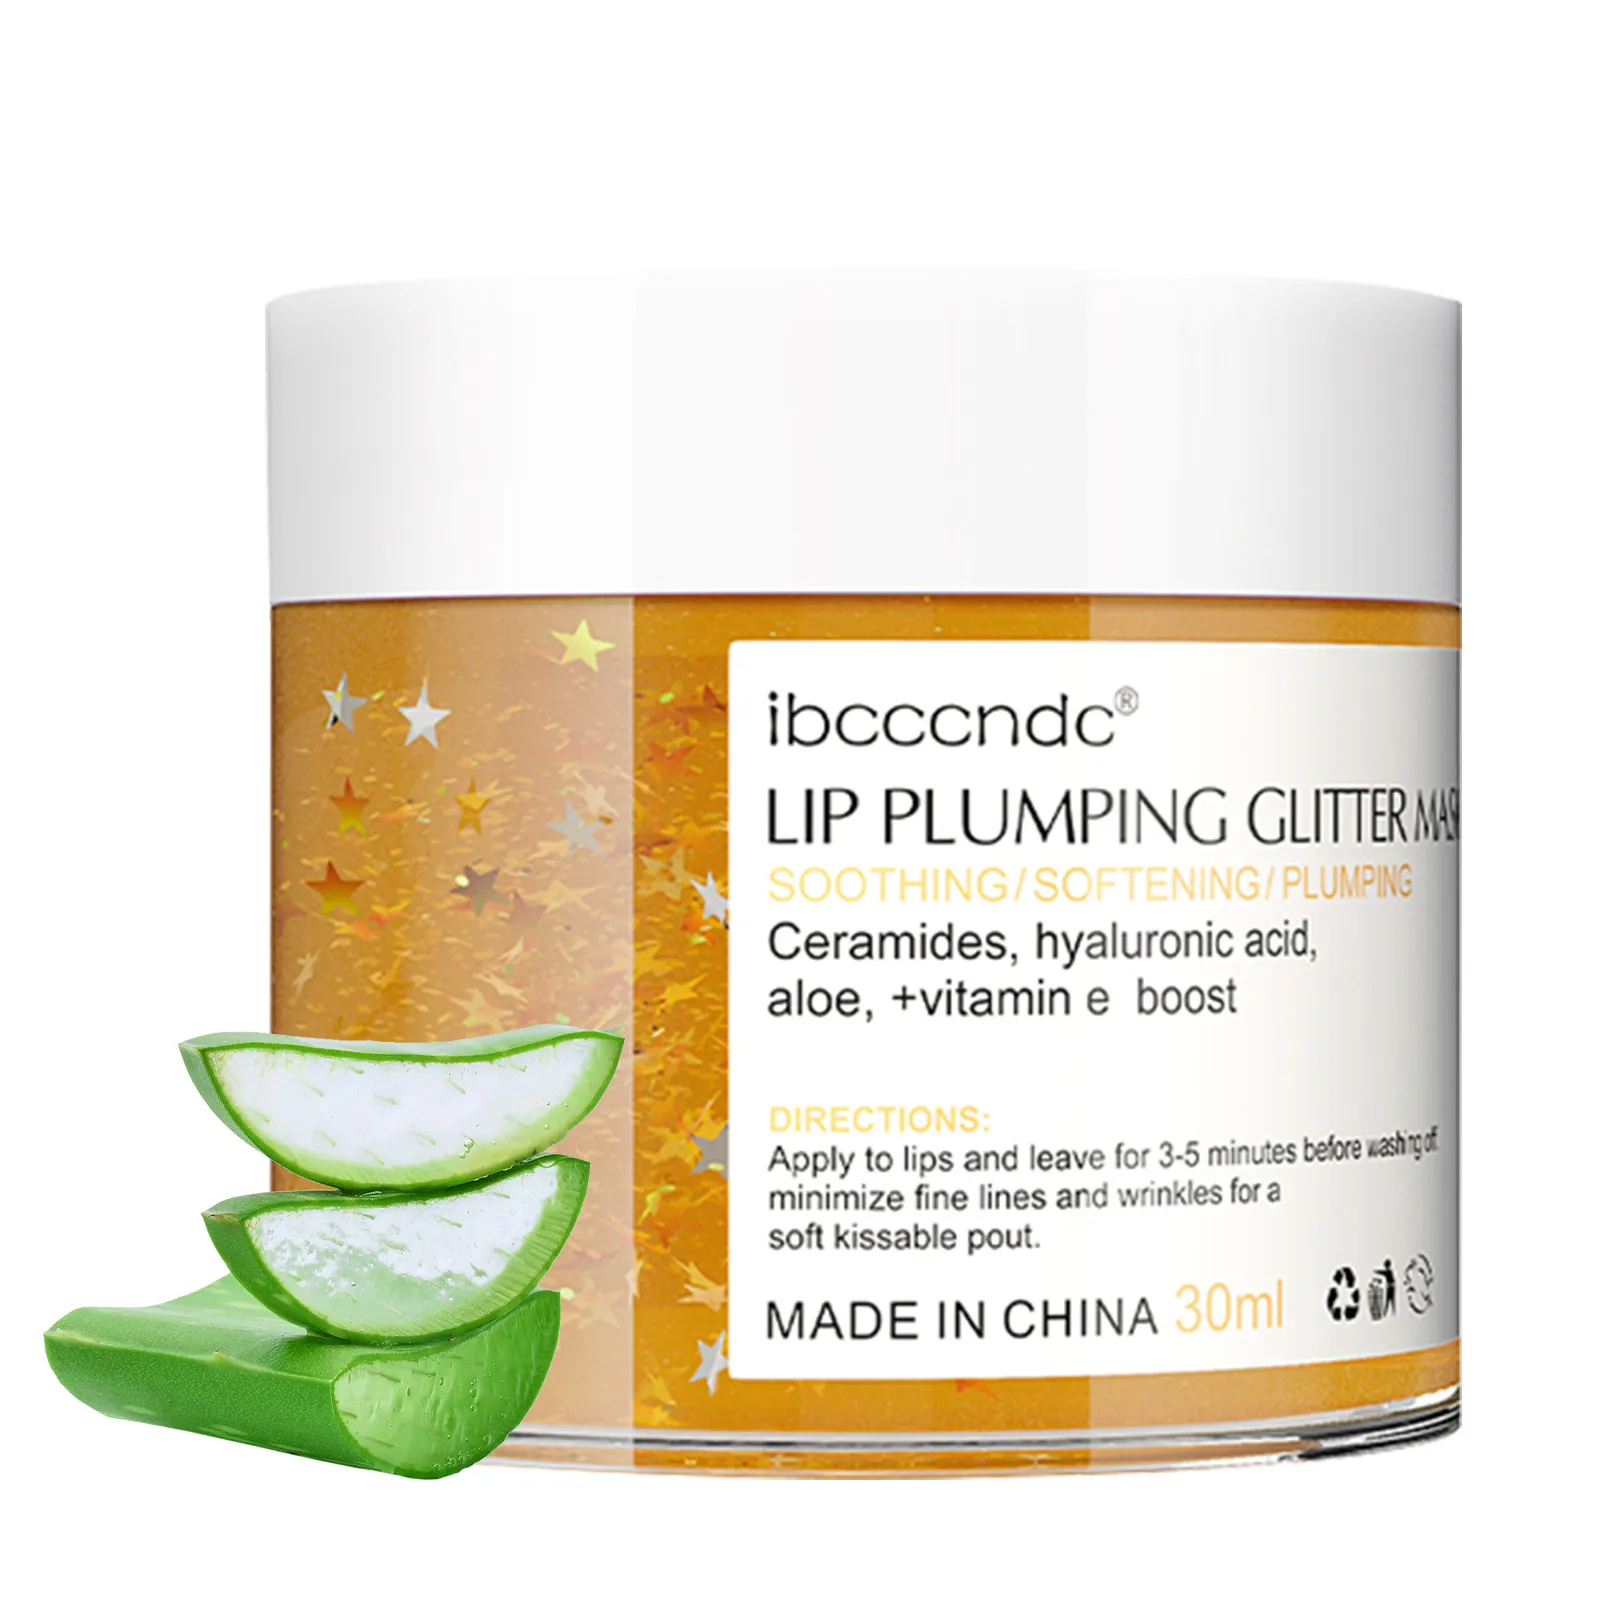 

Lip Plumping Balm Lip Sleeping Masque Reduces Fine Lines Moisturizing Lip Masque Great For Removing Dead Skin Natural Healthy